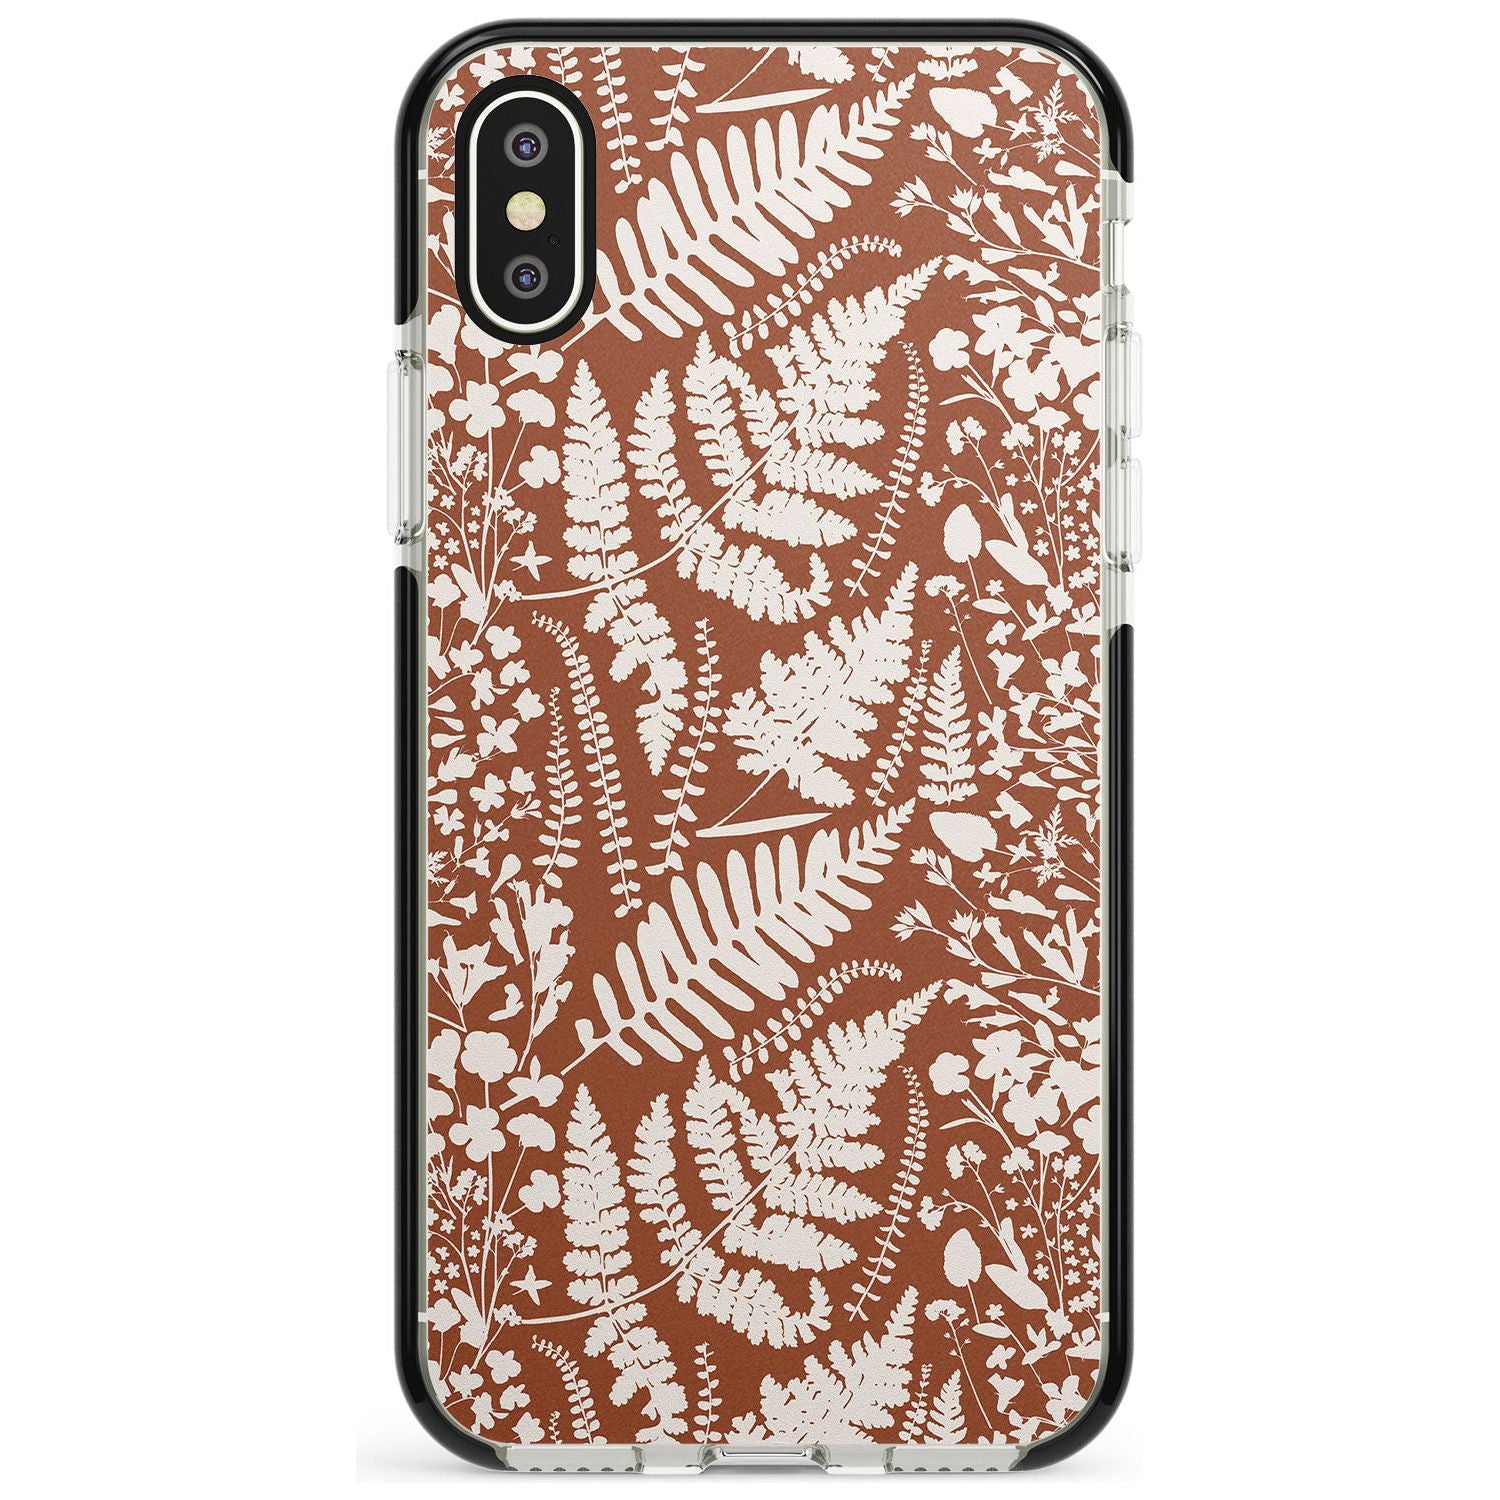 Wildflowers and Ferns on Terracotta Black Impact Phone Case for iPhone X XS Max XR